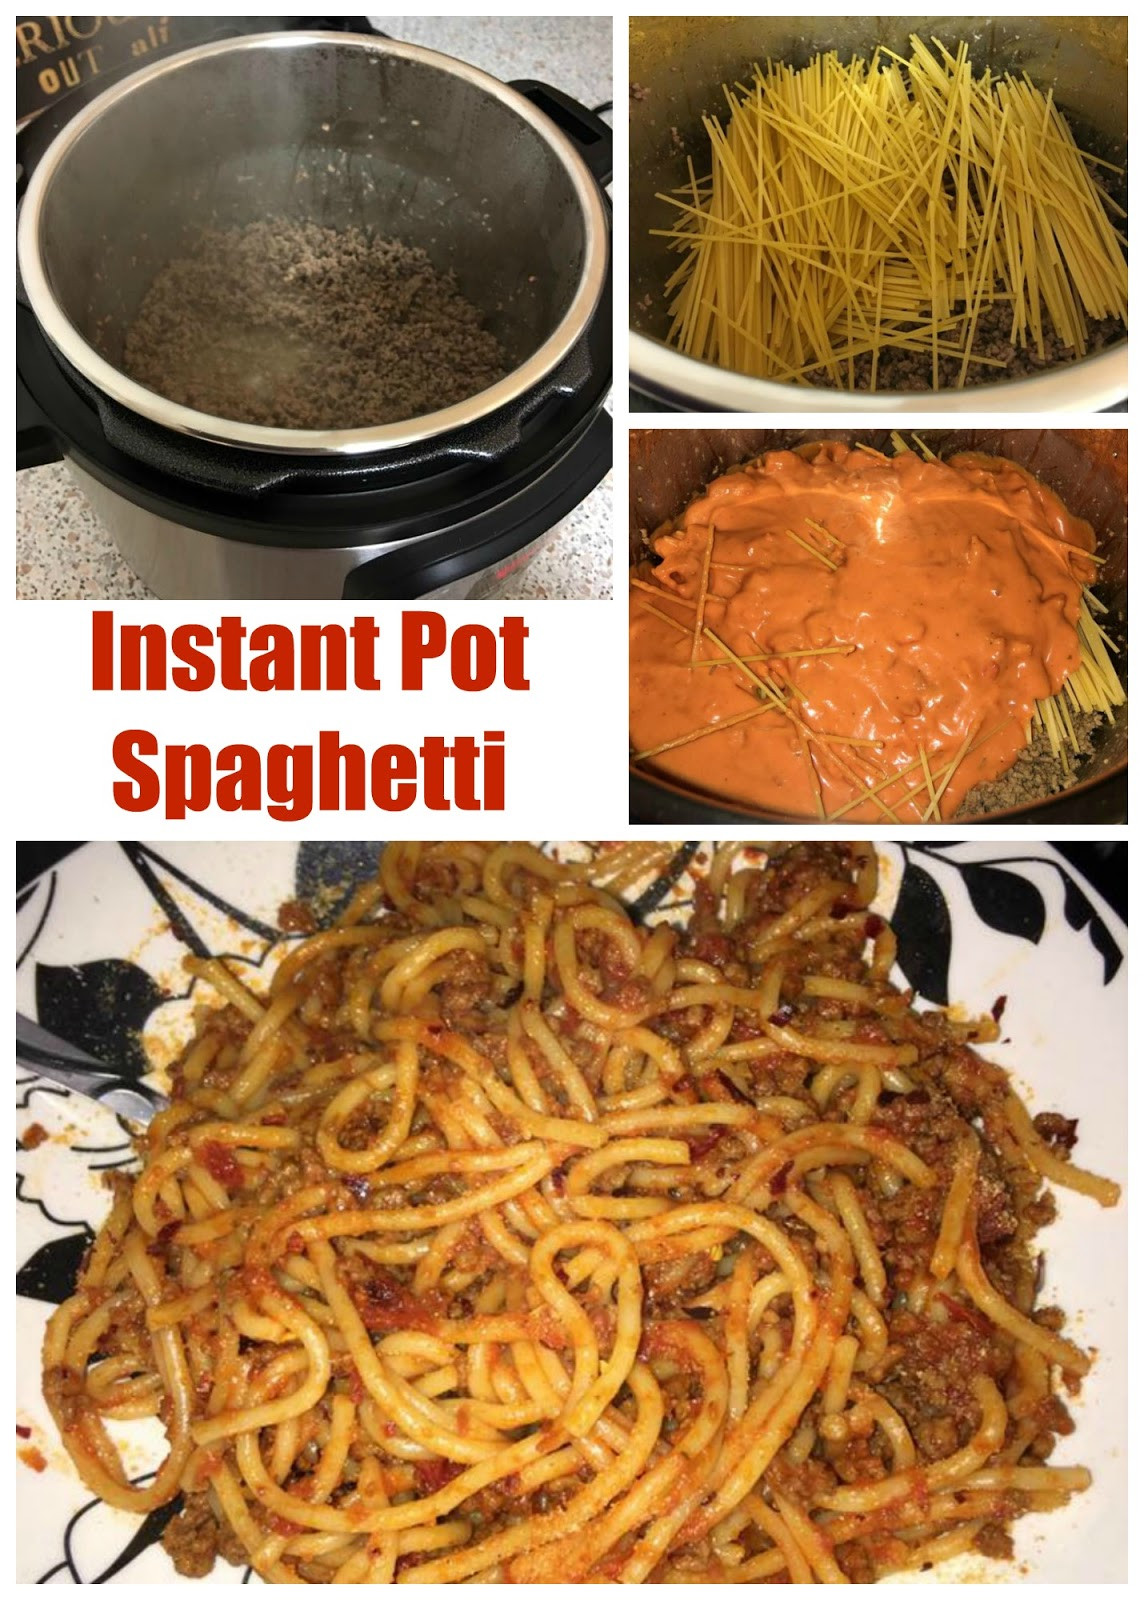 Instant Pot Spaghetti
 Reviews Chews & How Tos Instant Pot Spaghetti